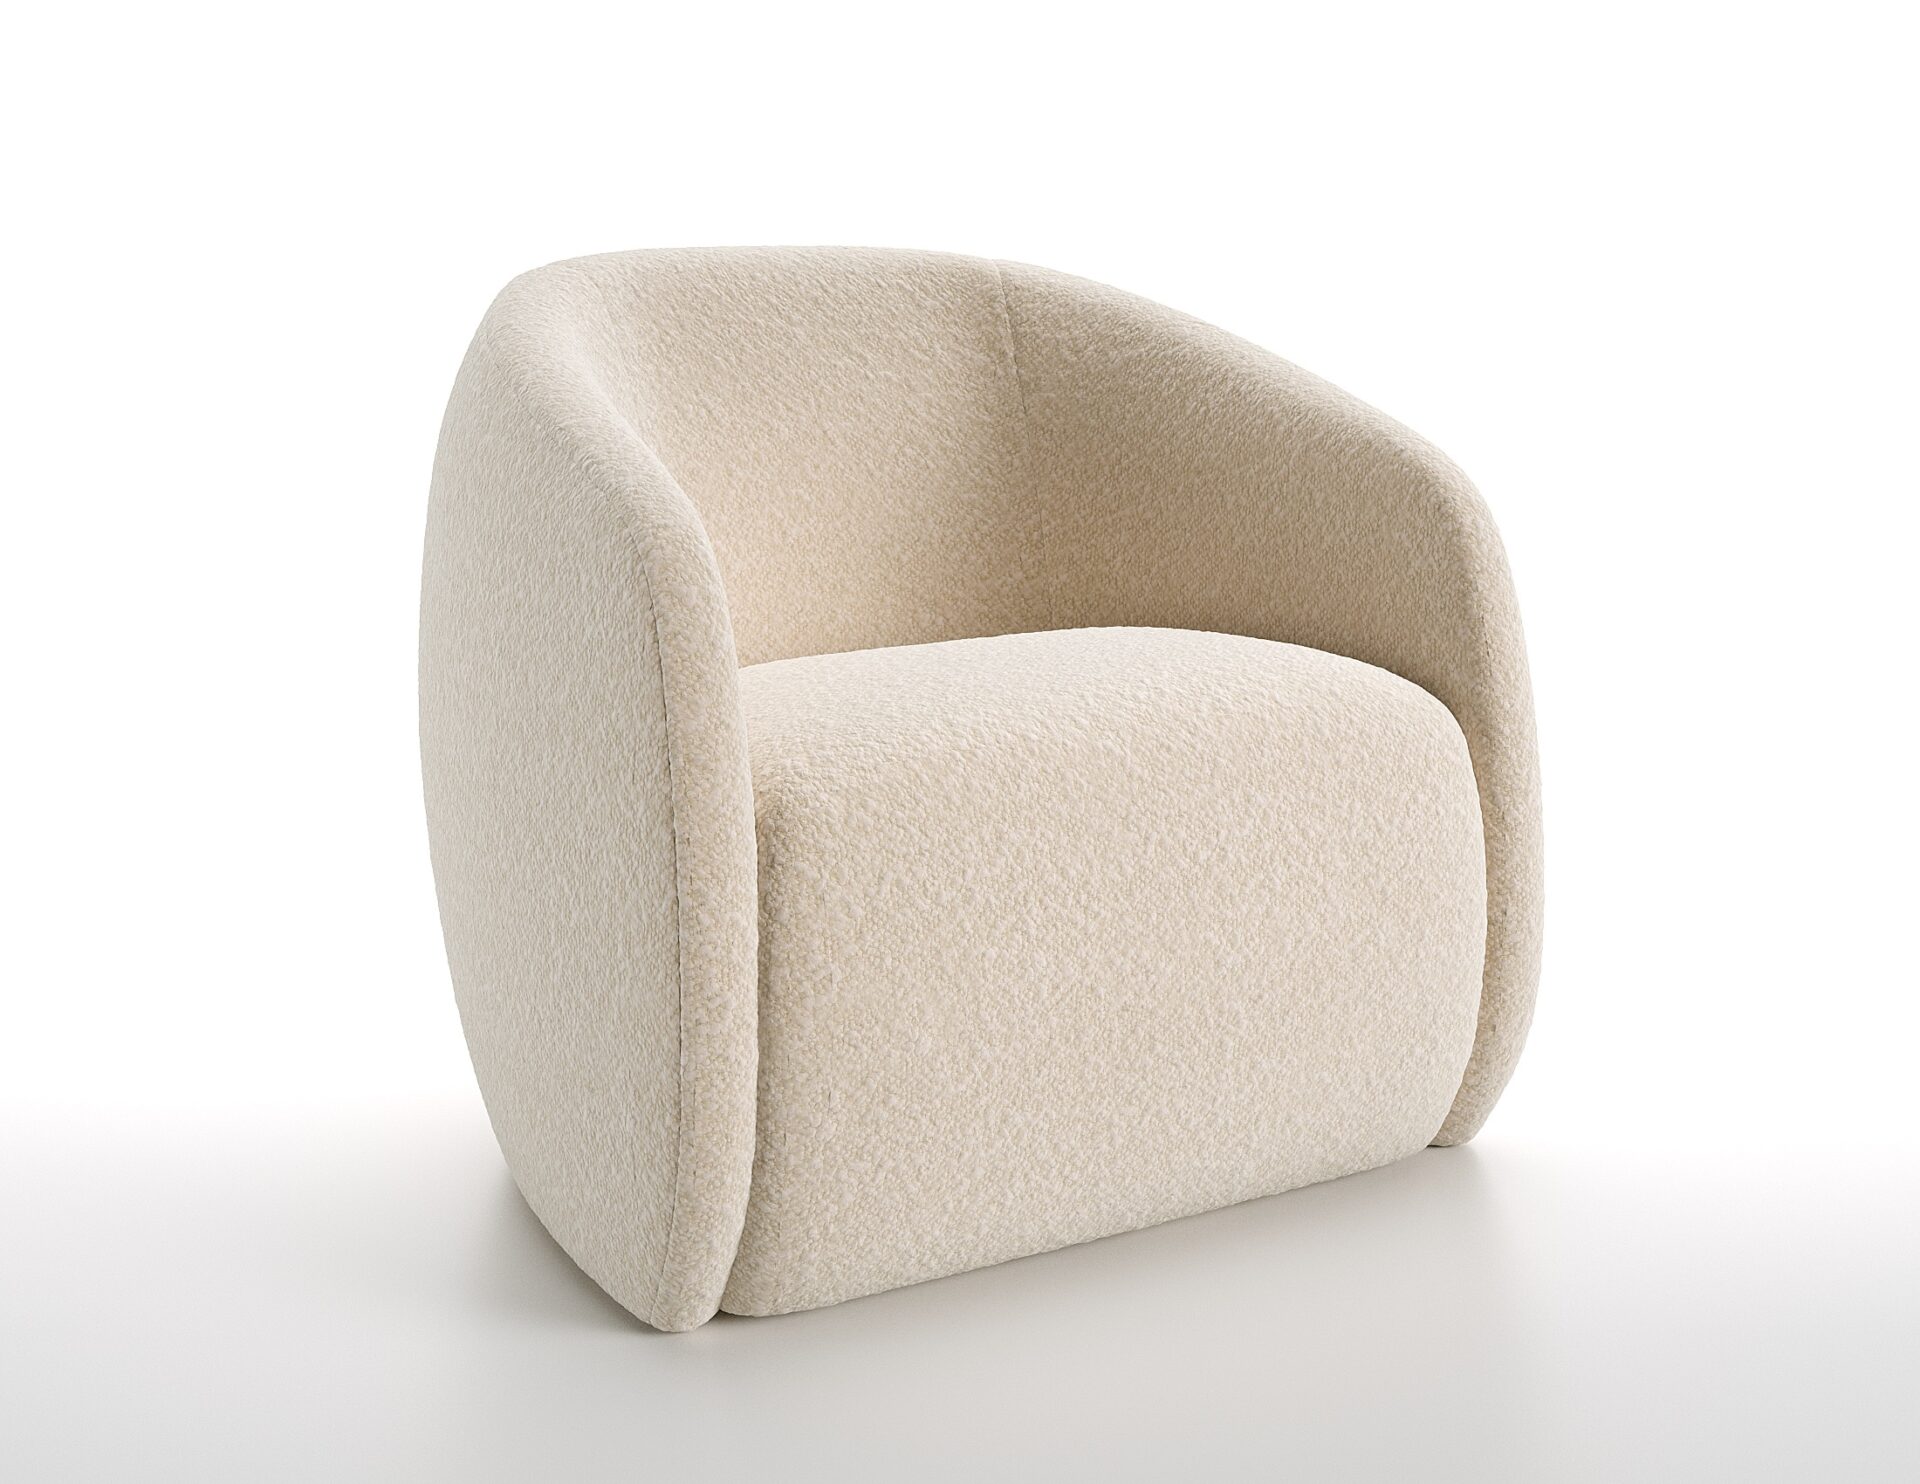 CALISTA-upholstered-chair-luxury-furniture-blend-home-furnishings